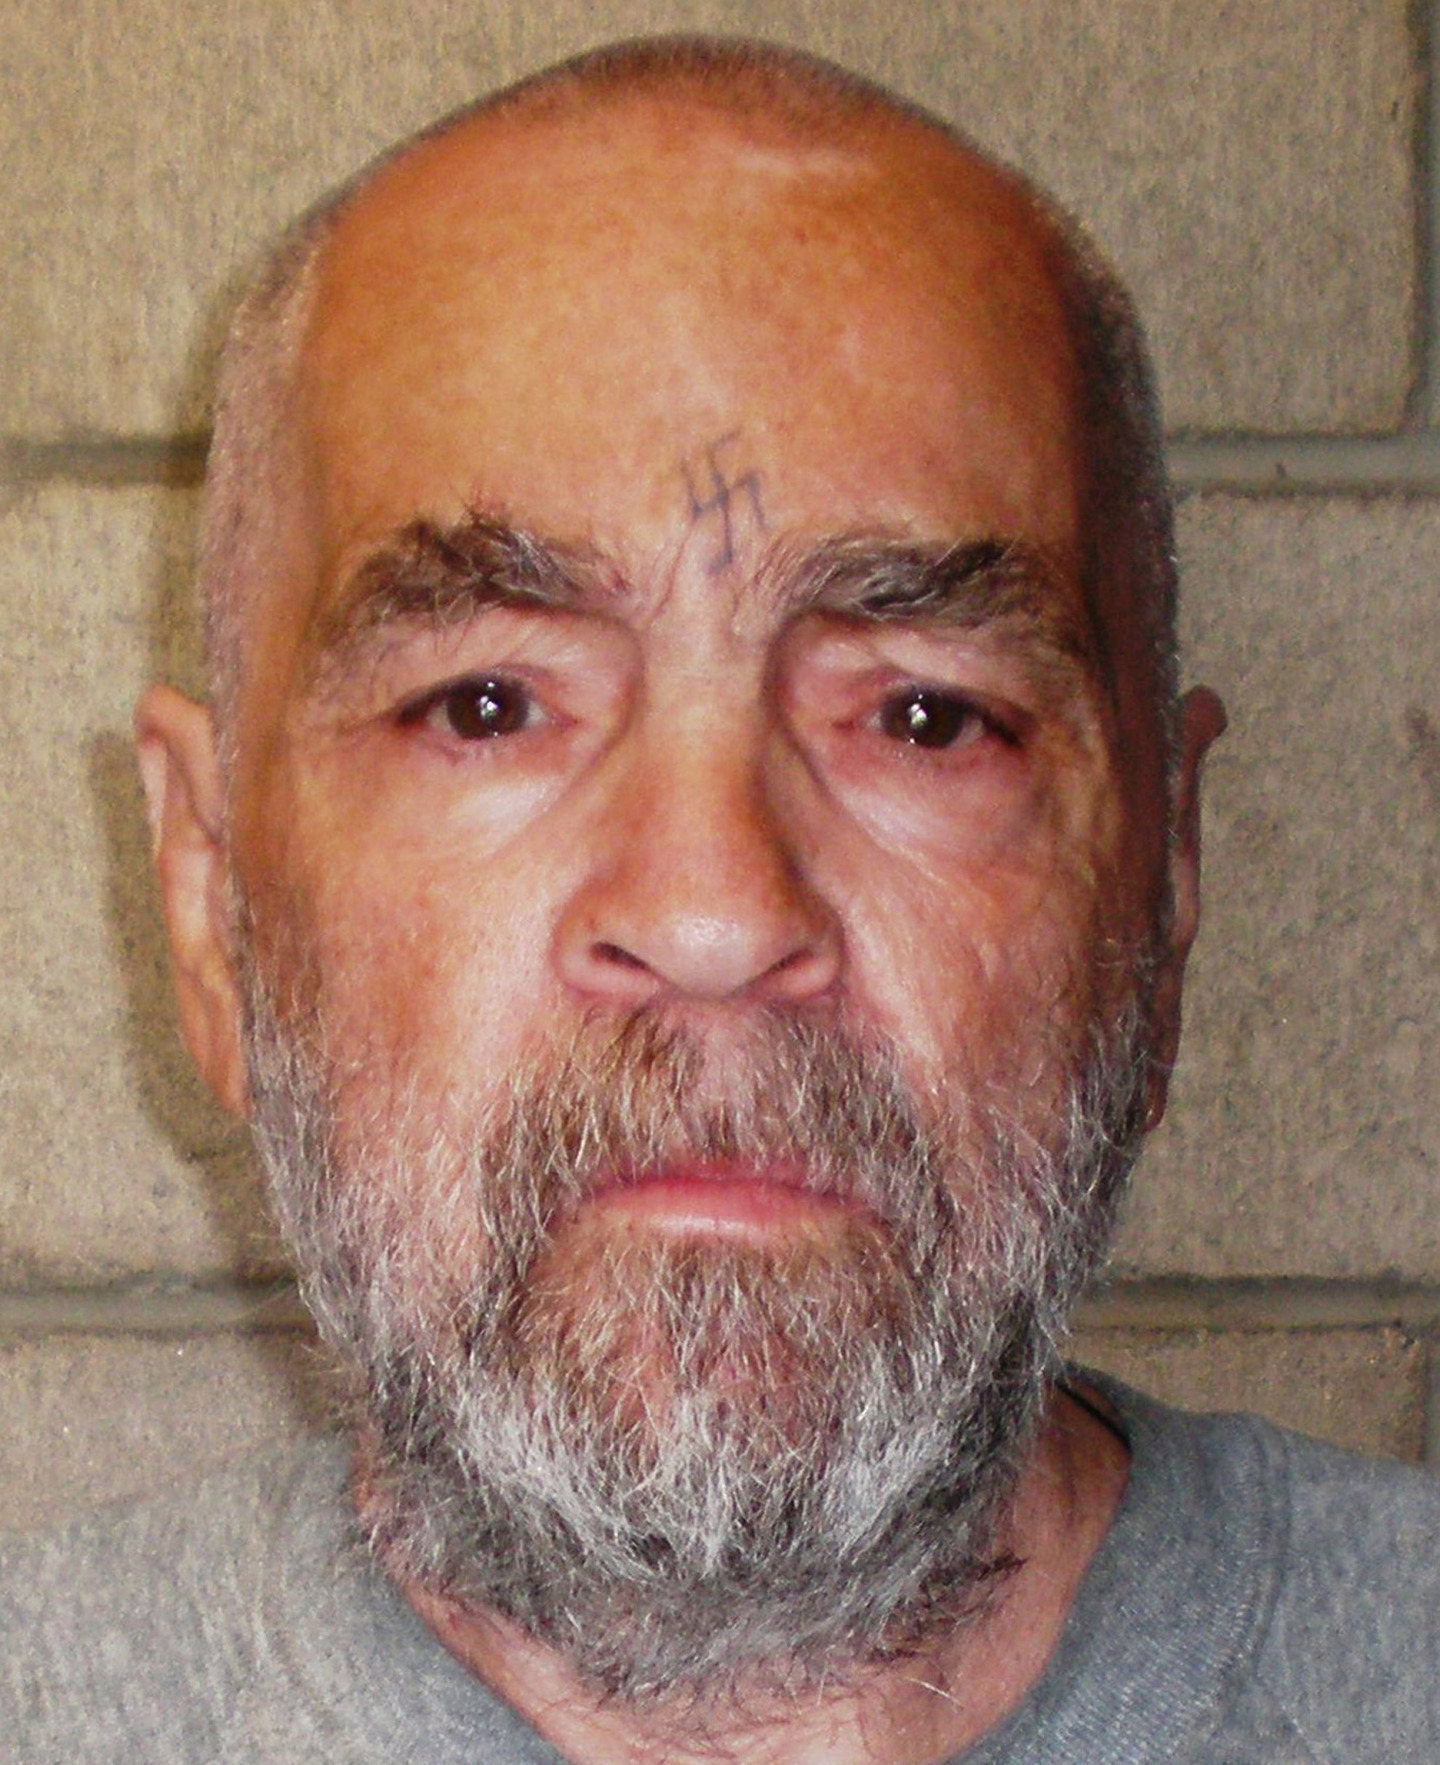 Charles Manson in 2009 photograph released by the California Department of Corrections and Rehabilitation. (Getty Images)